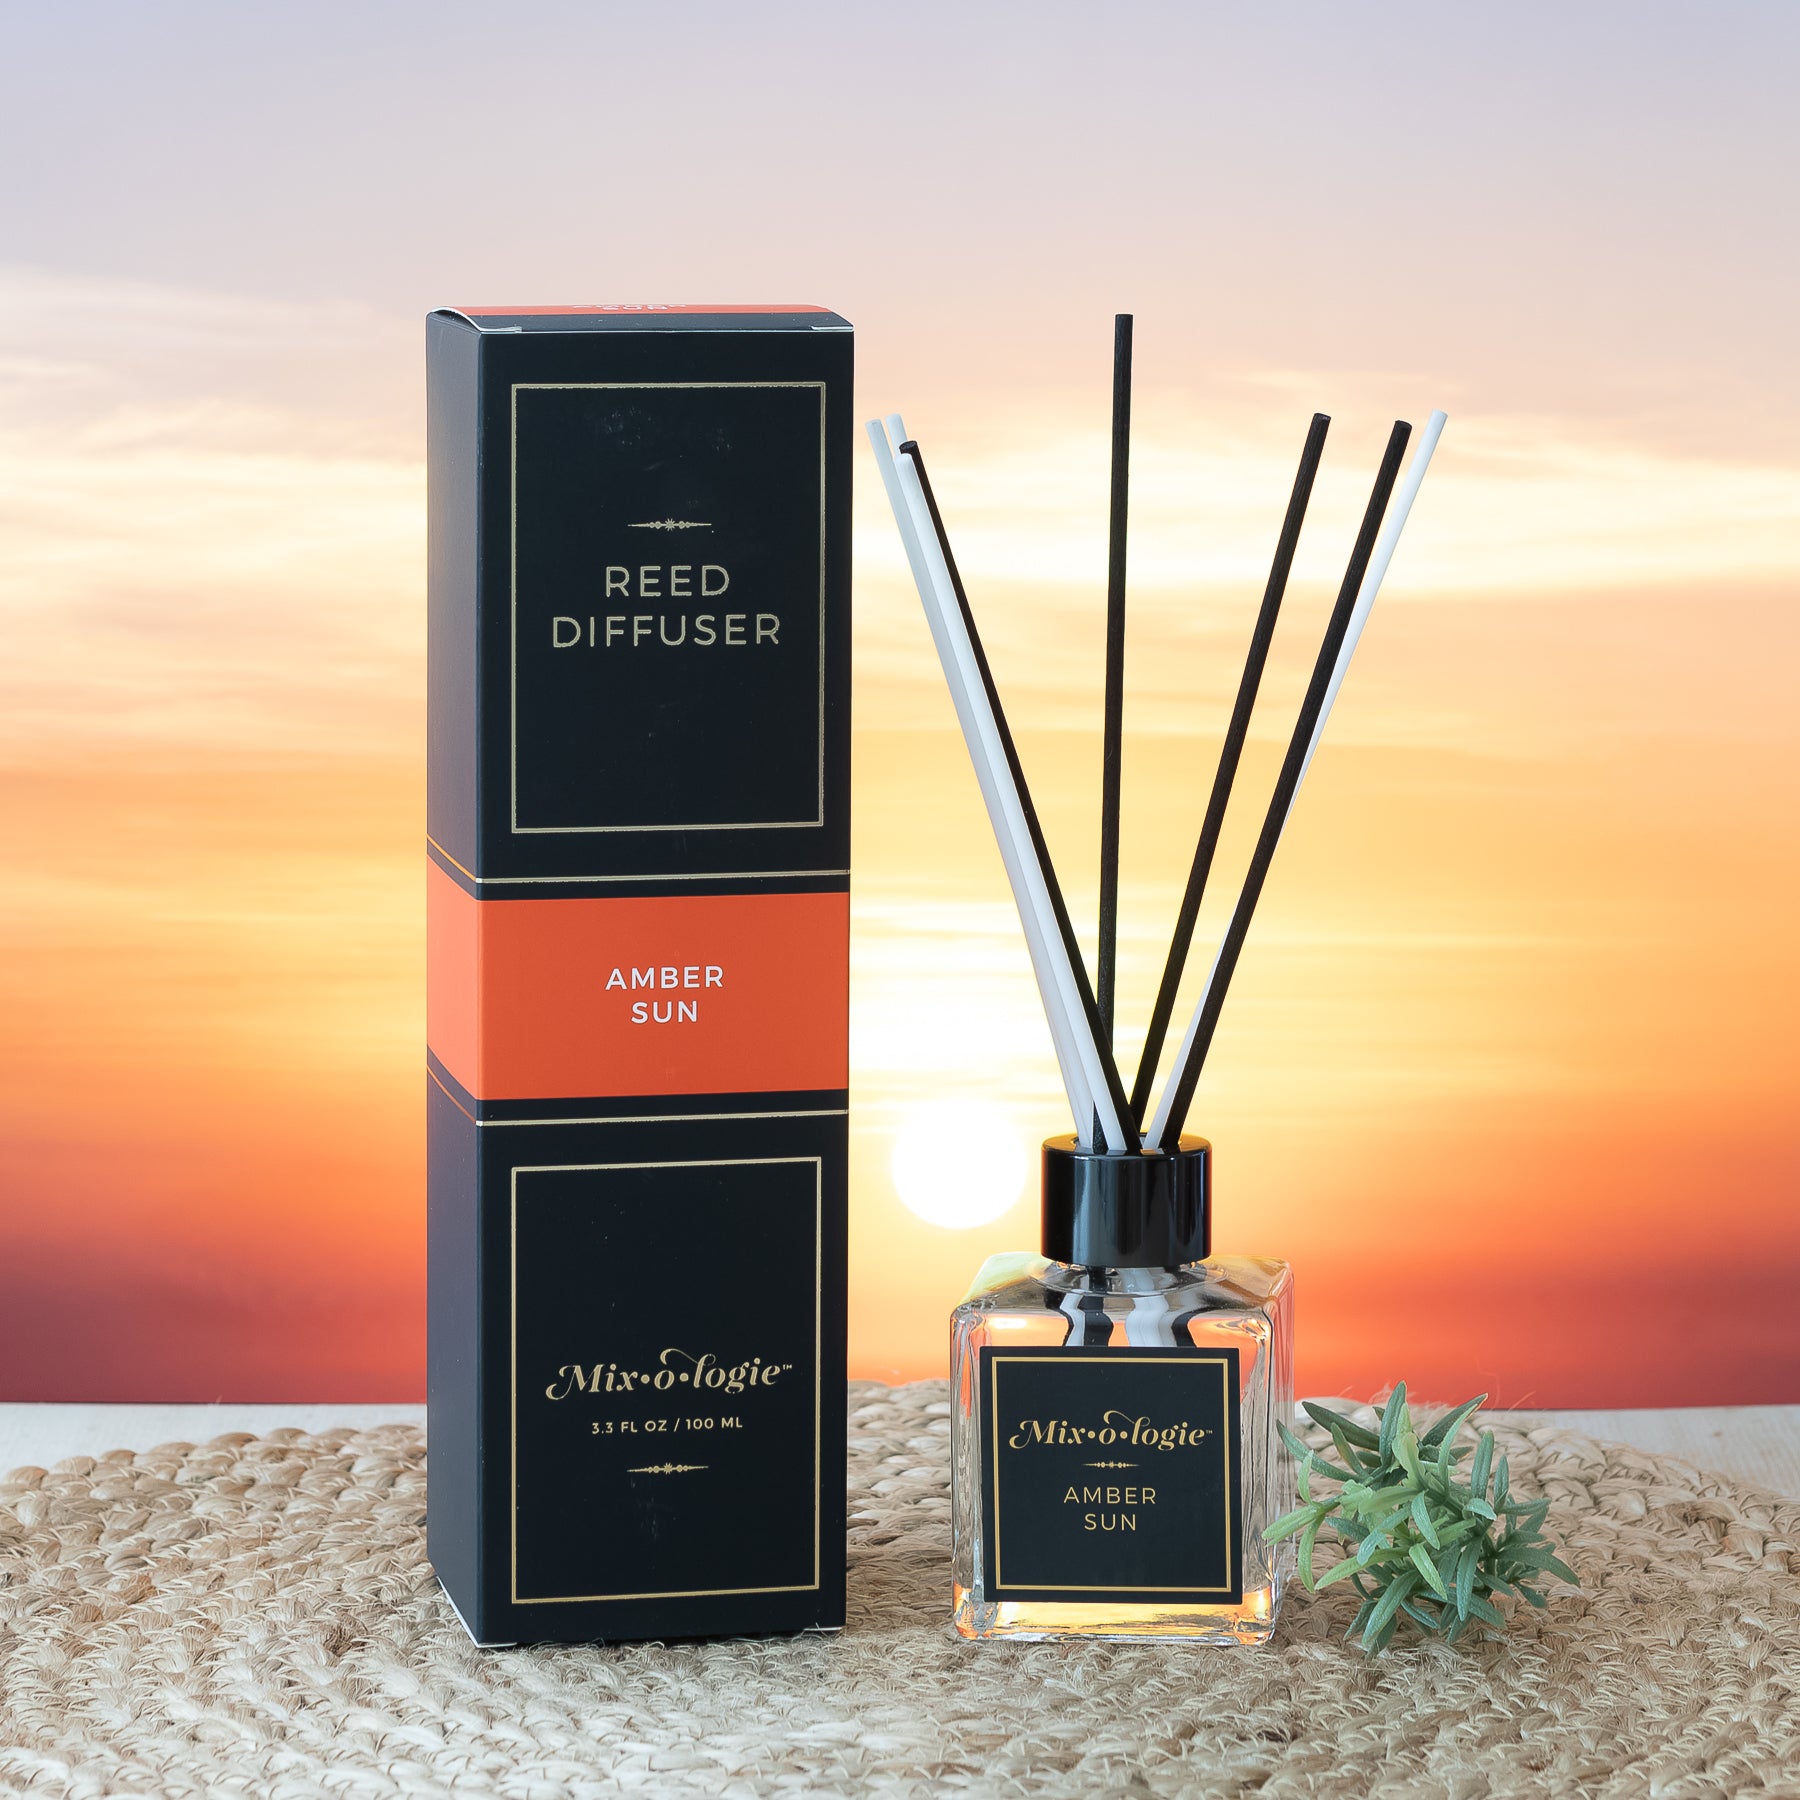 Amber Sun Reed Diffuser is a clear square glass container with black label that says Mixologie – Amber Sun. Has a black top and 4 white & 4 black reed sticks coming out of top, is 3.3 fl oz or 100 mL of clear scented liquid. Black rectangle package box with orange label. Box and diffuser are pictured with sunset background on woven place mat with greenery.